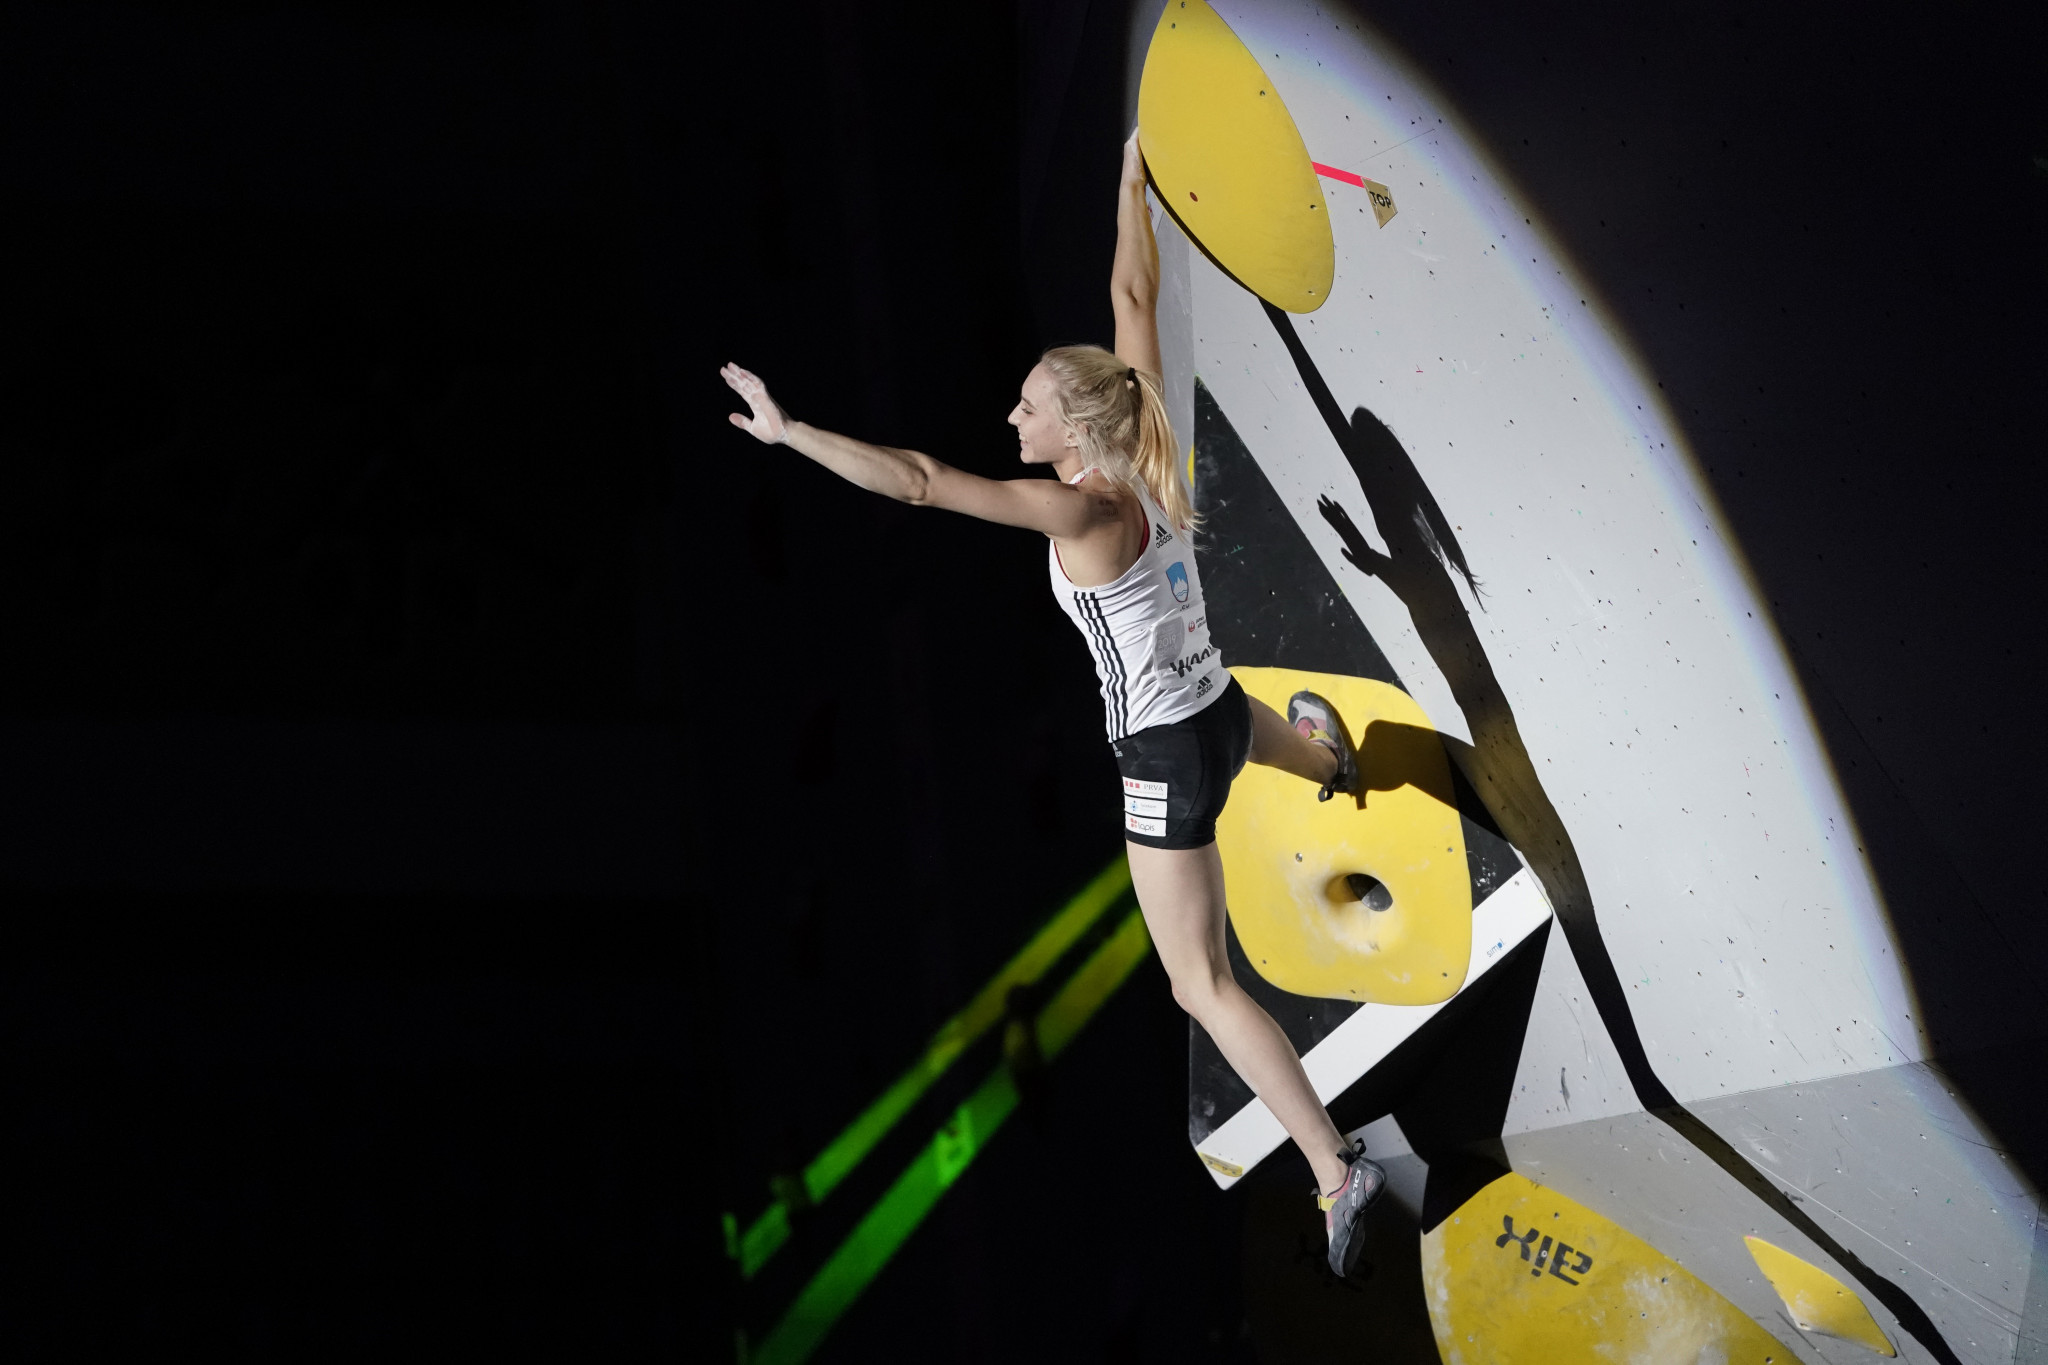 Garnbret defends combined title to win third gold at IFSC World Championships